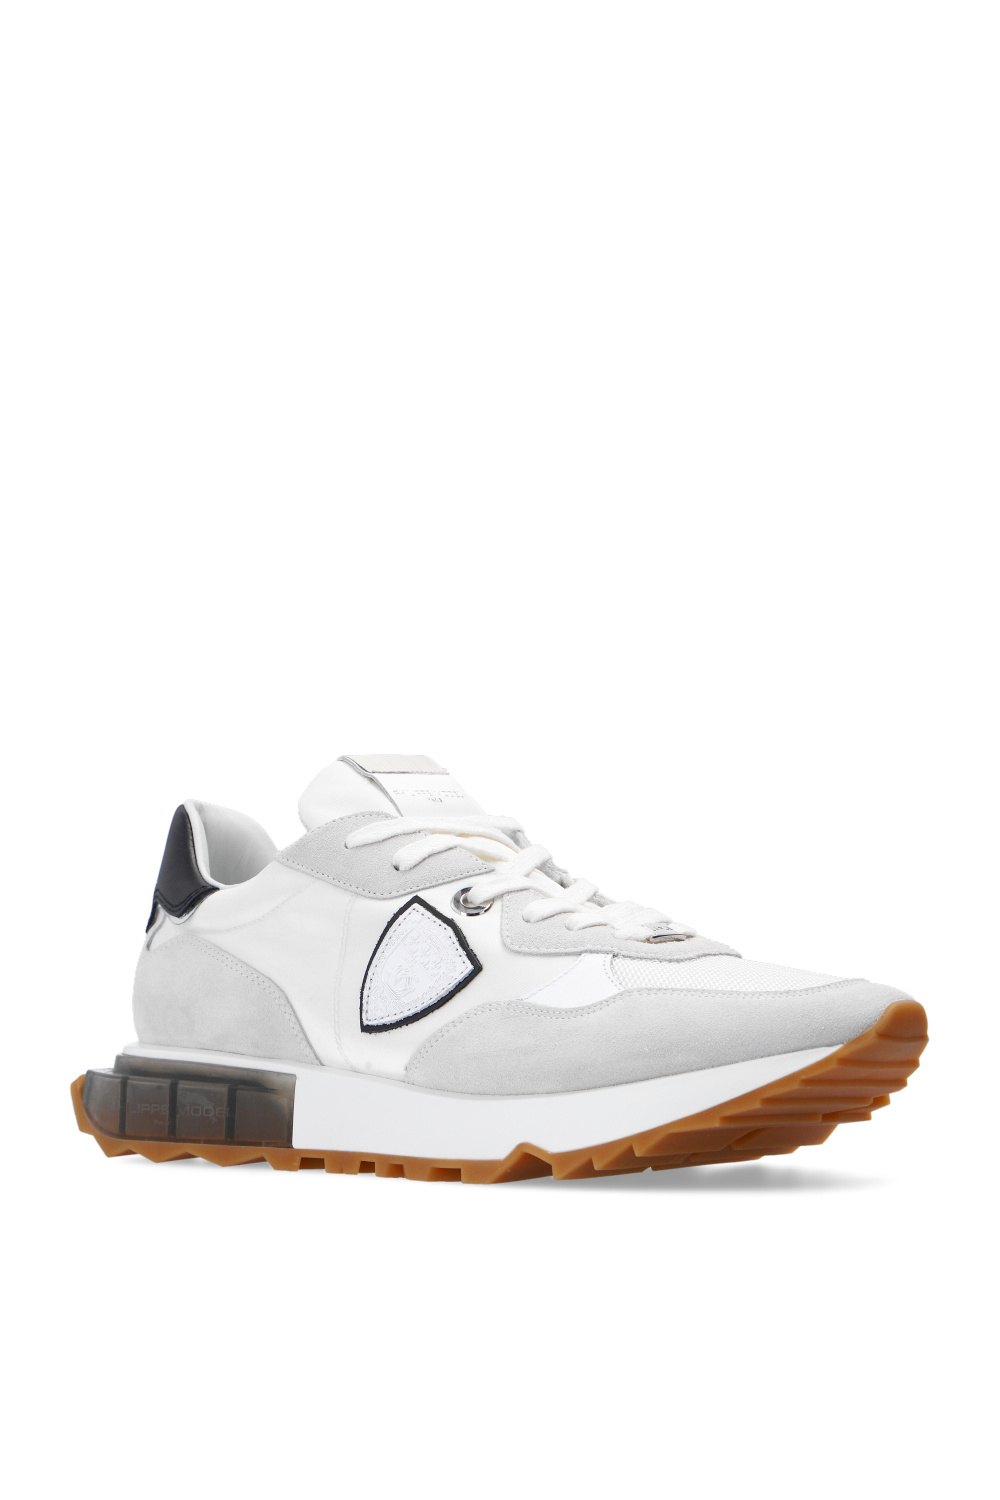 Philippe Model 'Dsquared2 Slash low-top sneakers